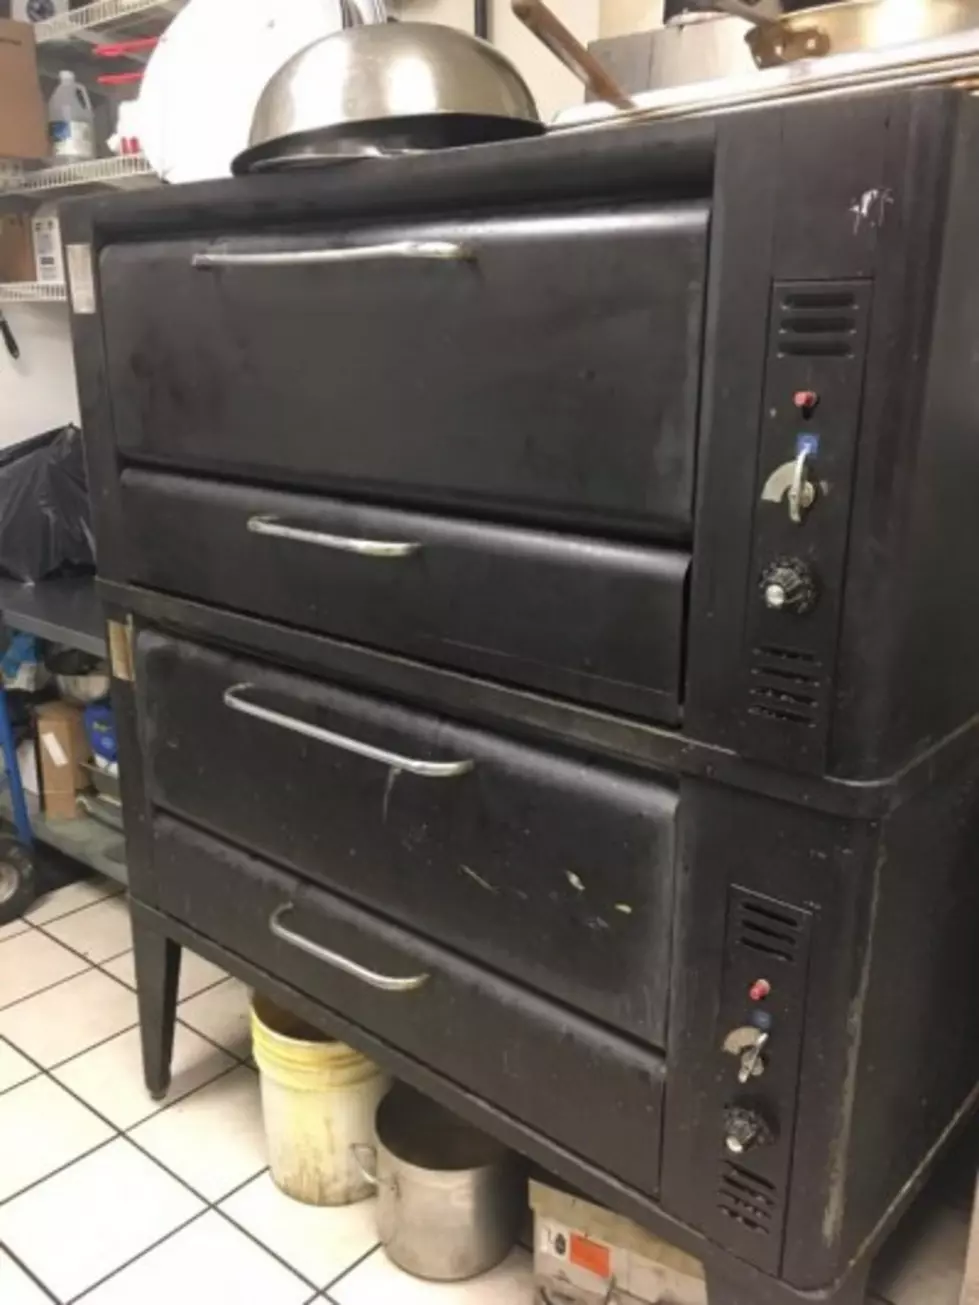 Every Rockford Home Needs a Restaurant Style Pizza Oven